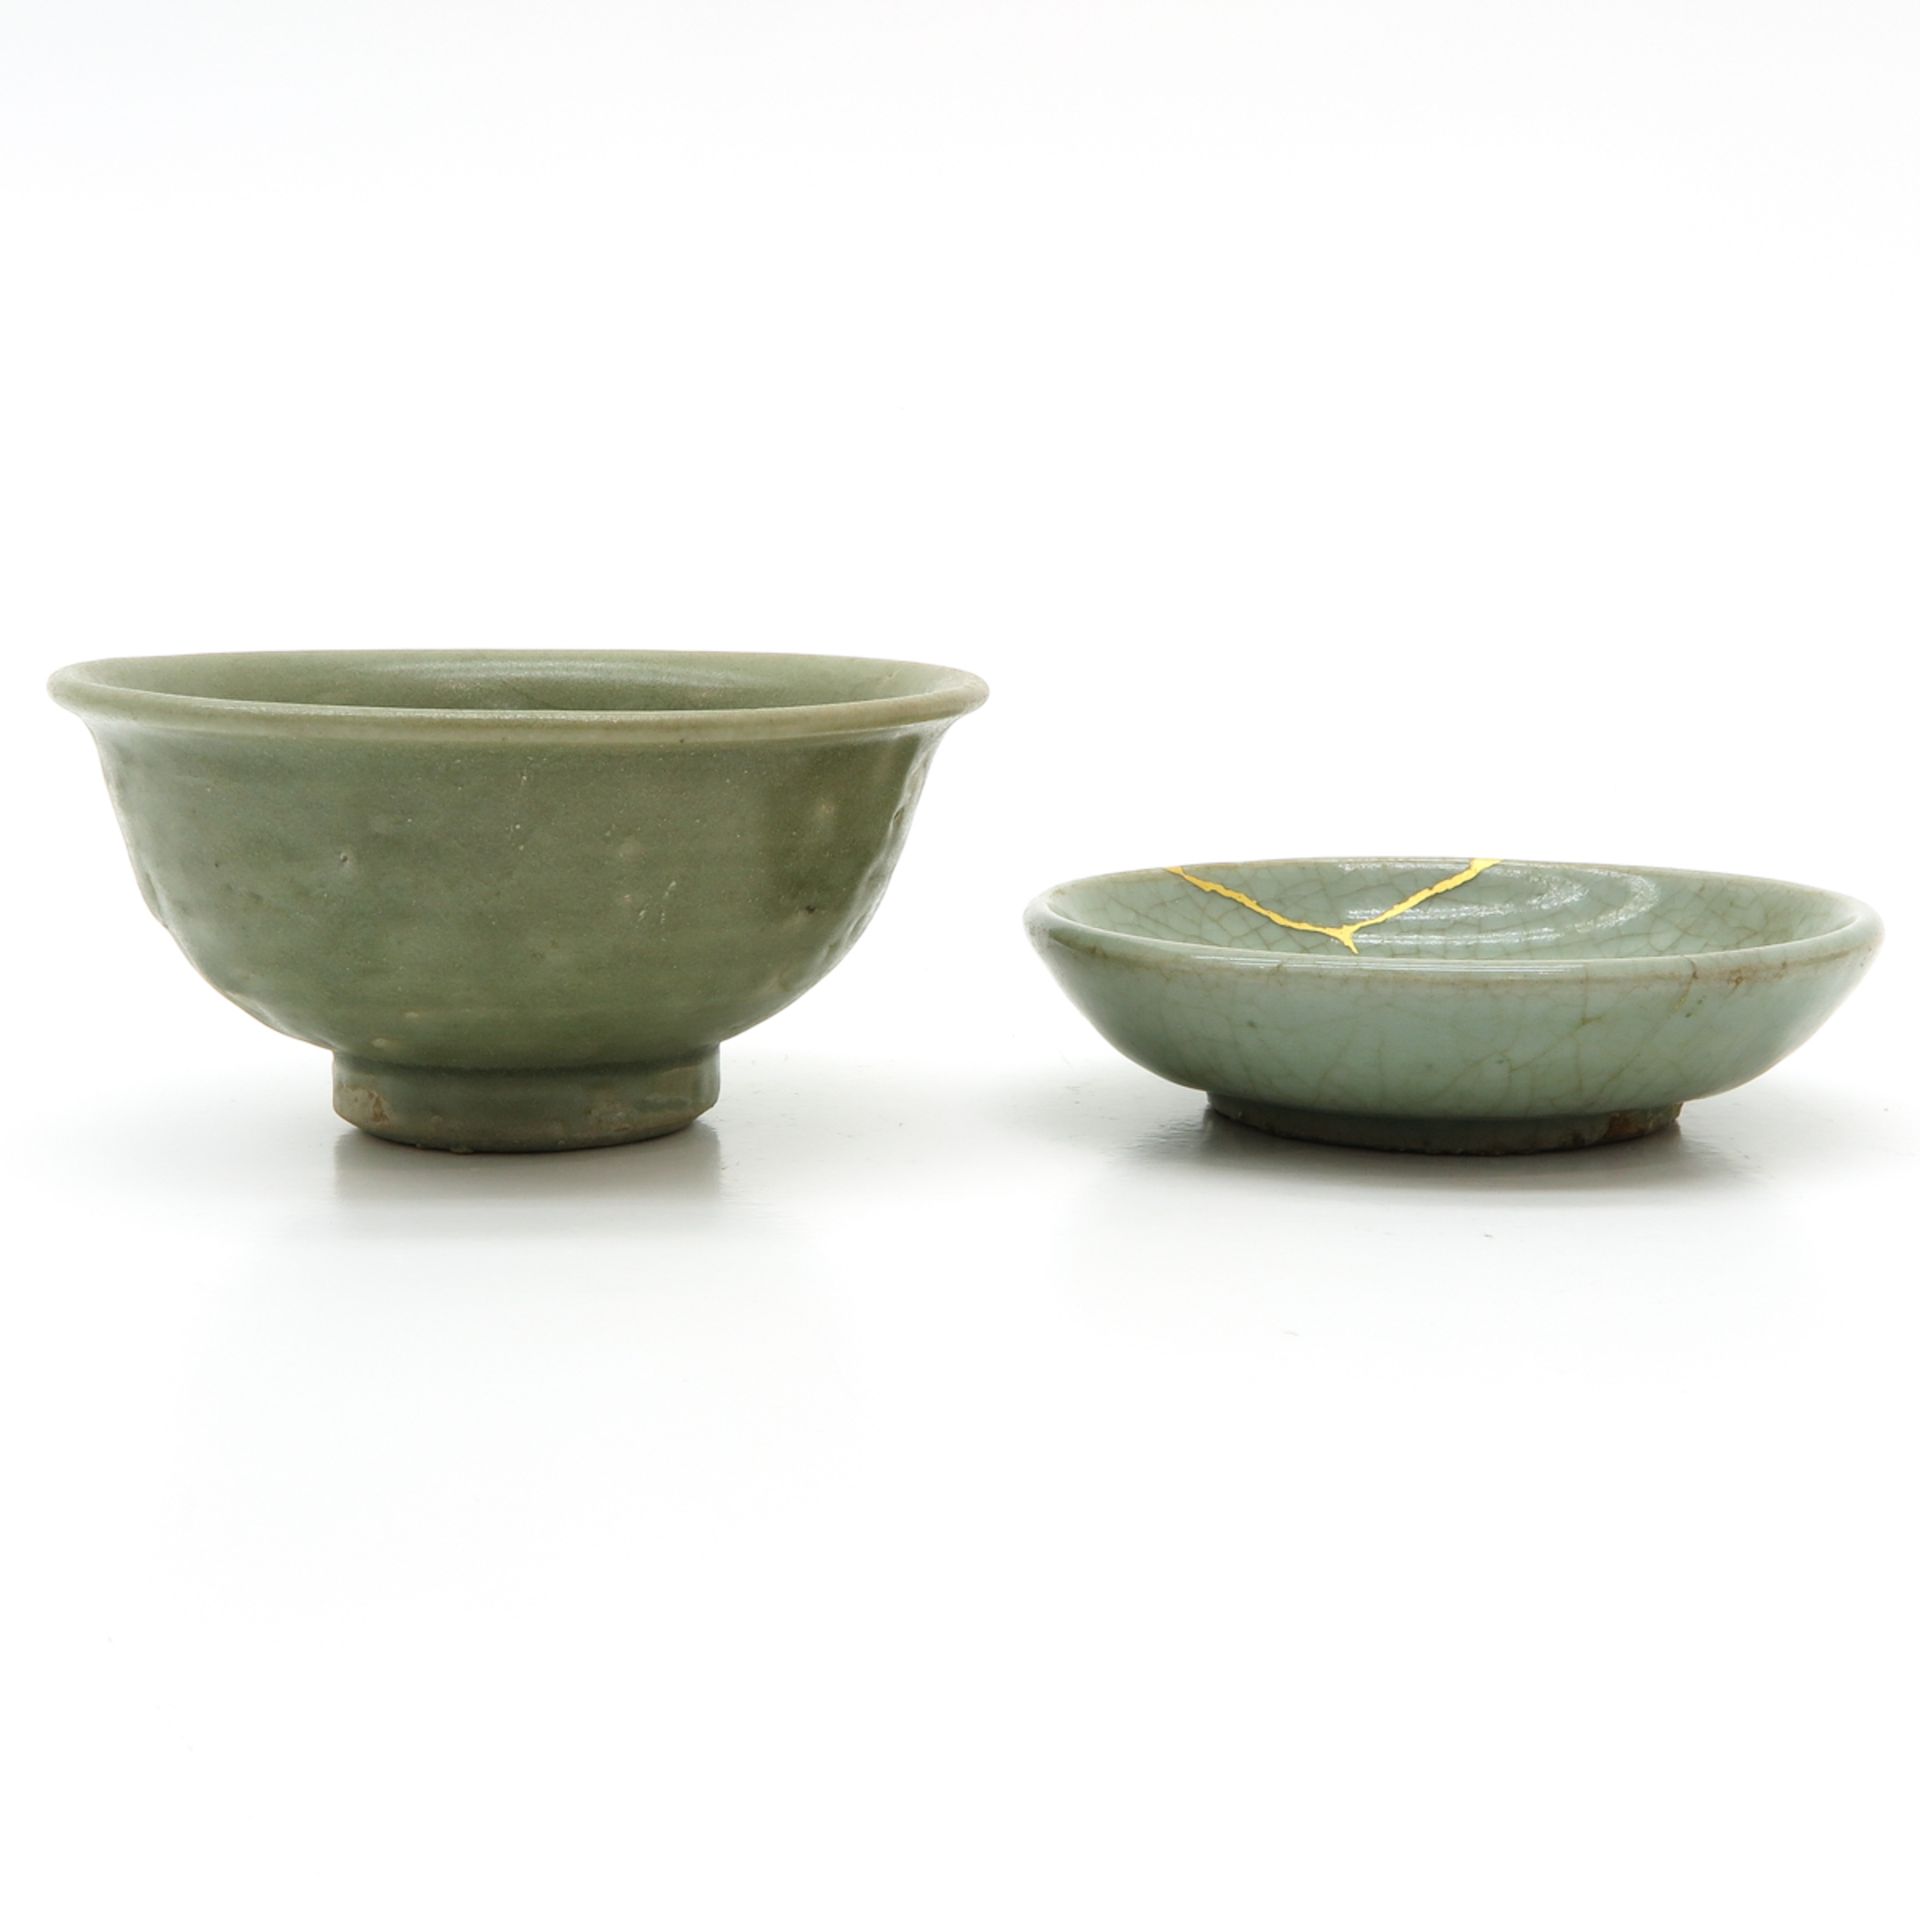 Lot of 2 Chinese Celadon Bowls